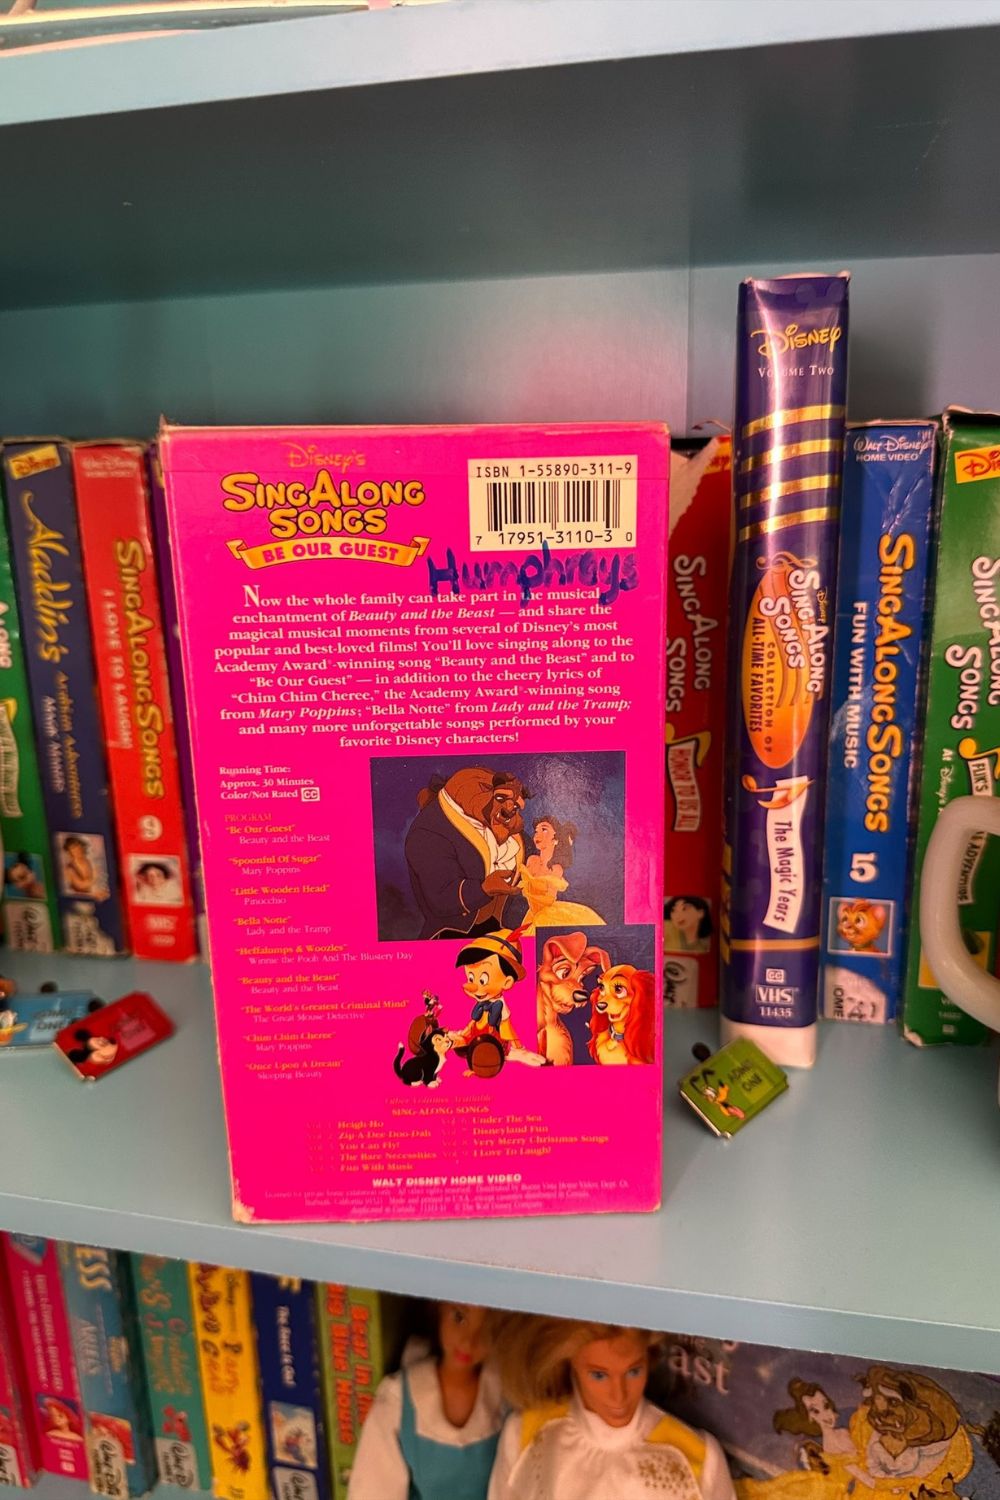 BE OUR GUEST SING ALONG SONGS VHS*